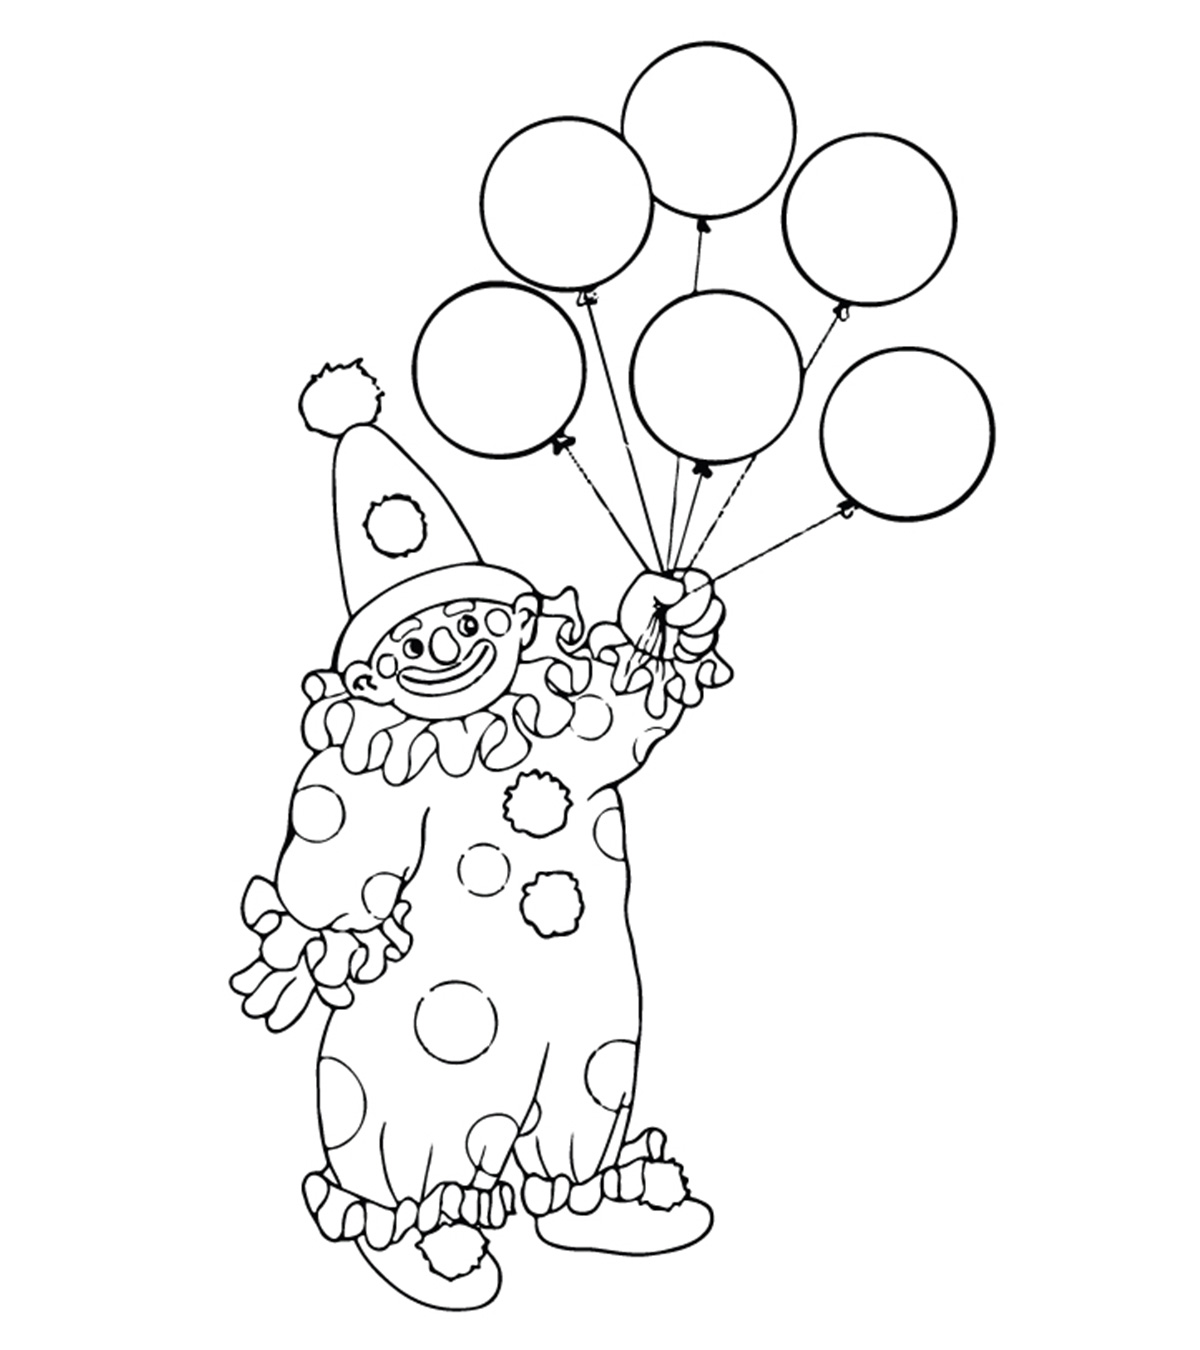 10 Funny Joker Coloring Pages For Your Little Ones